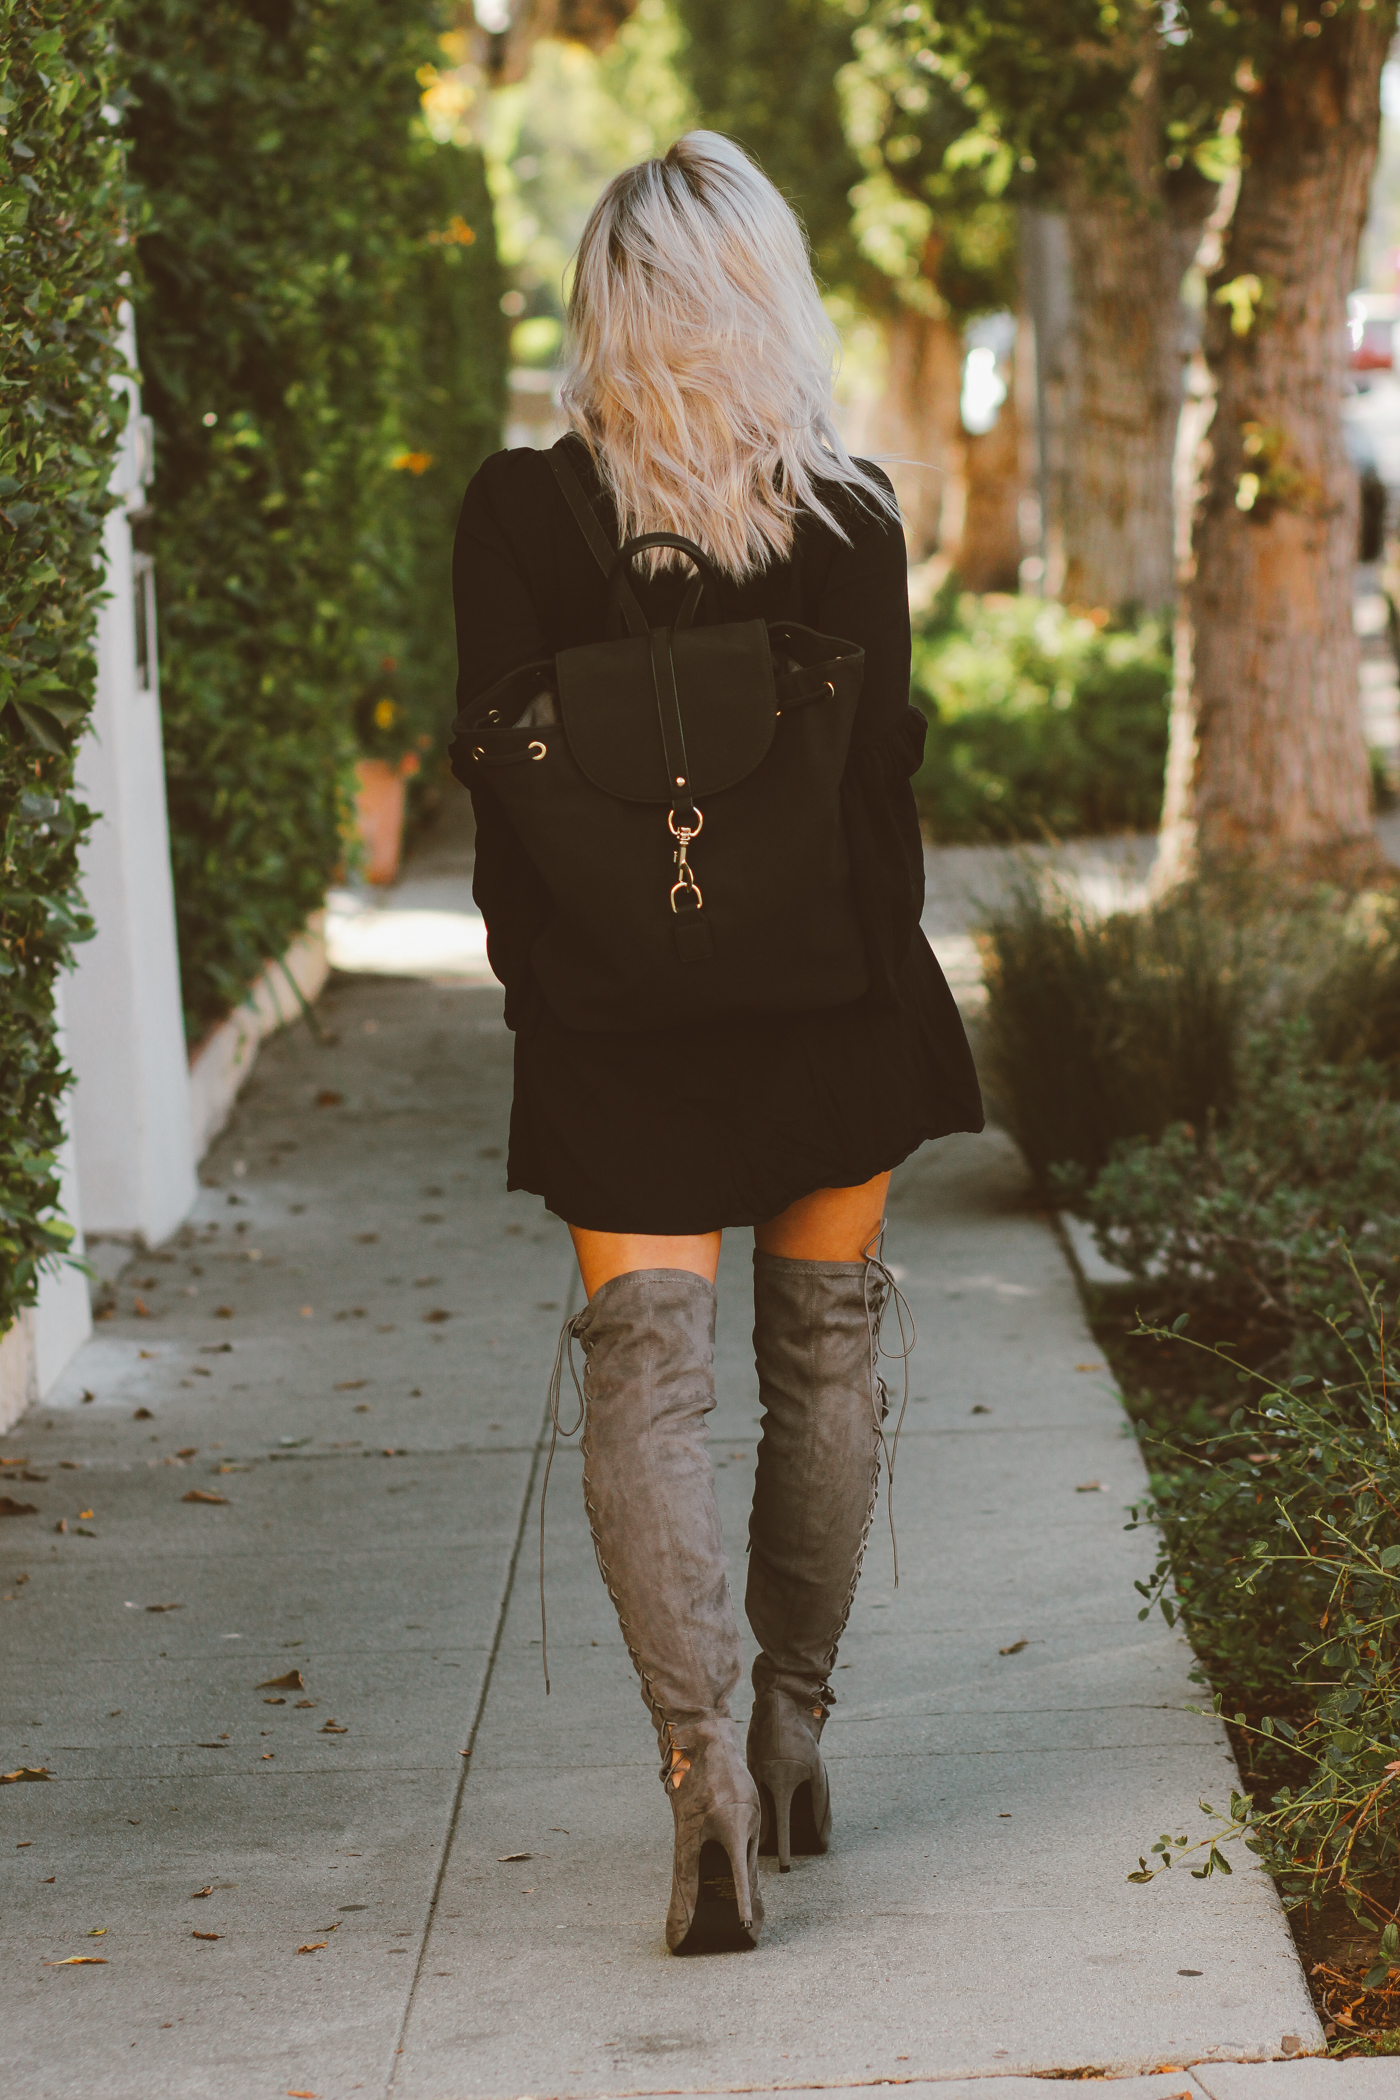 Blondie in the City | Black Bell Sleeve Dress @justfabonline | Suede Thigh High Boots @shoedazzle | Fall Fashion